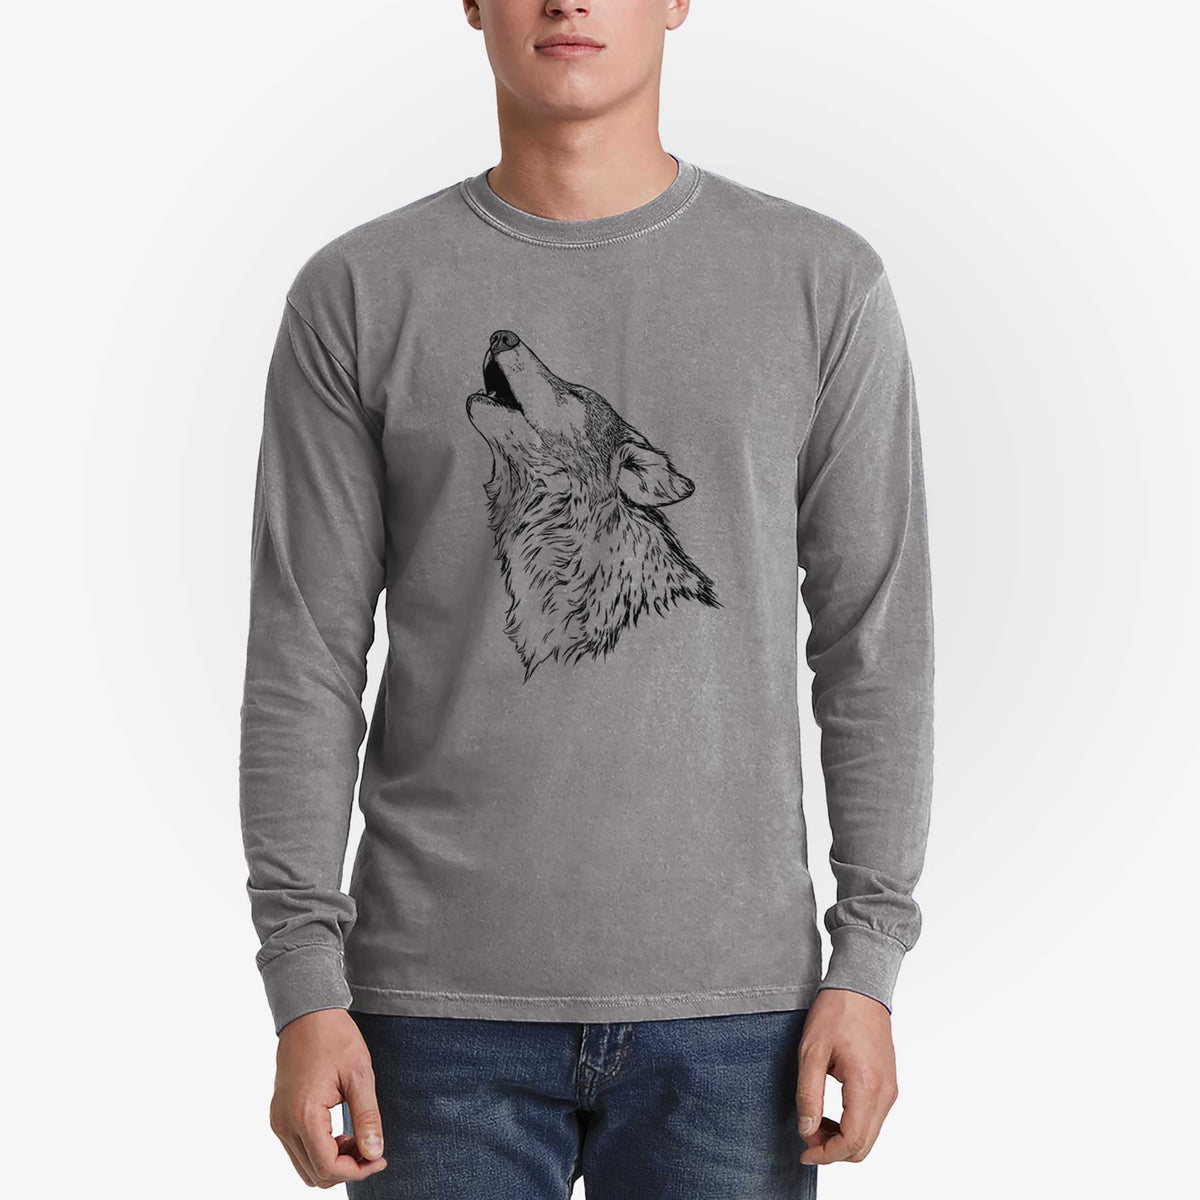 Canis lupus - Grey Wolf Howling - Heavyweight 100% Cotton Long Sleeve